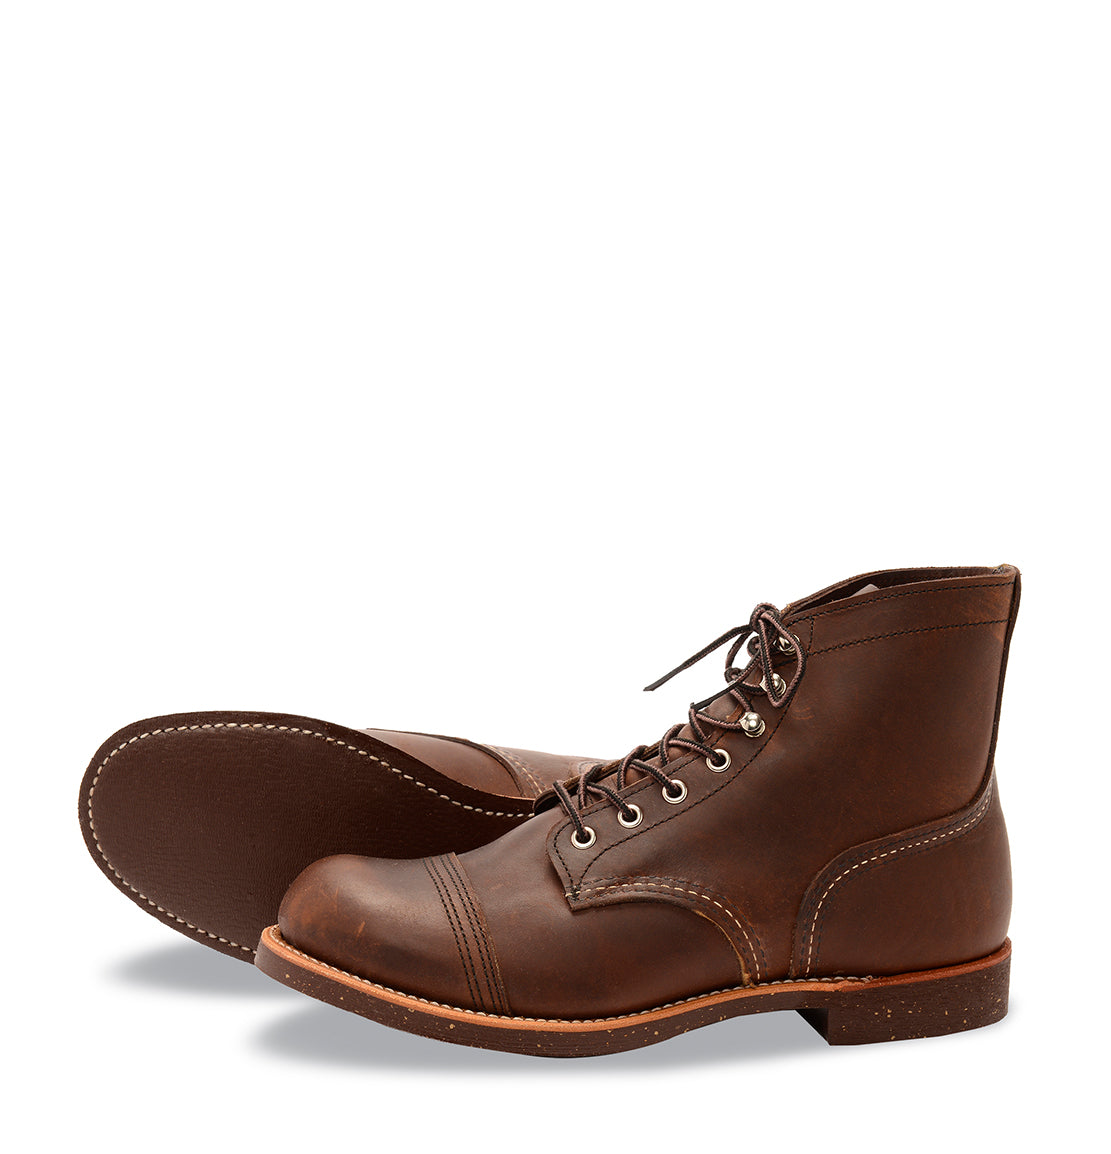 Redwing shoe laces Leicester